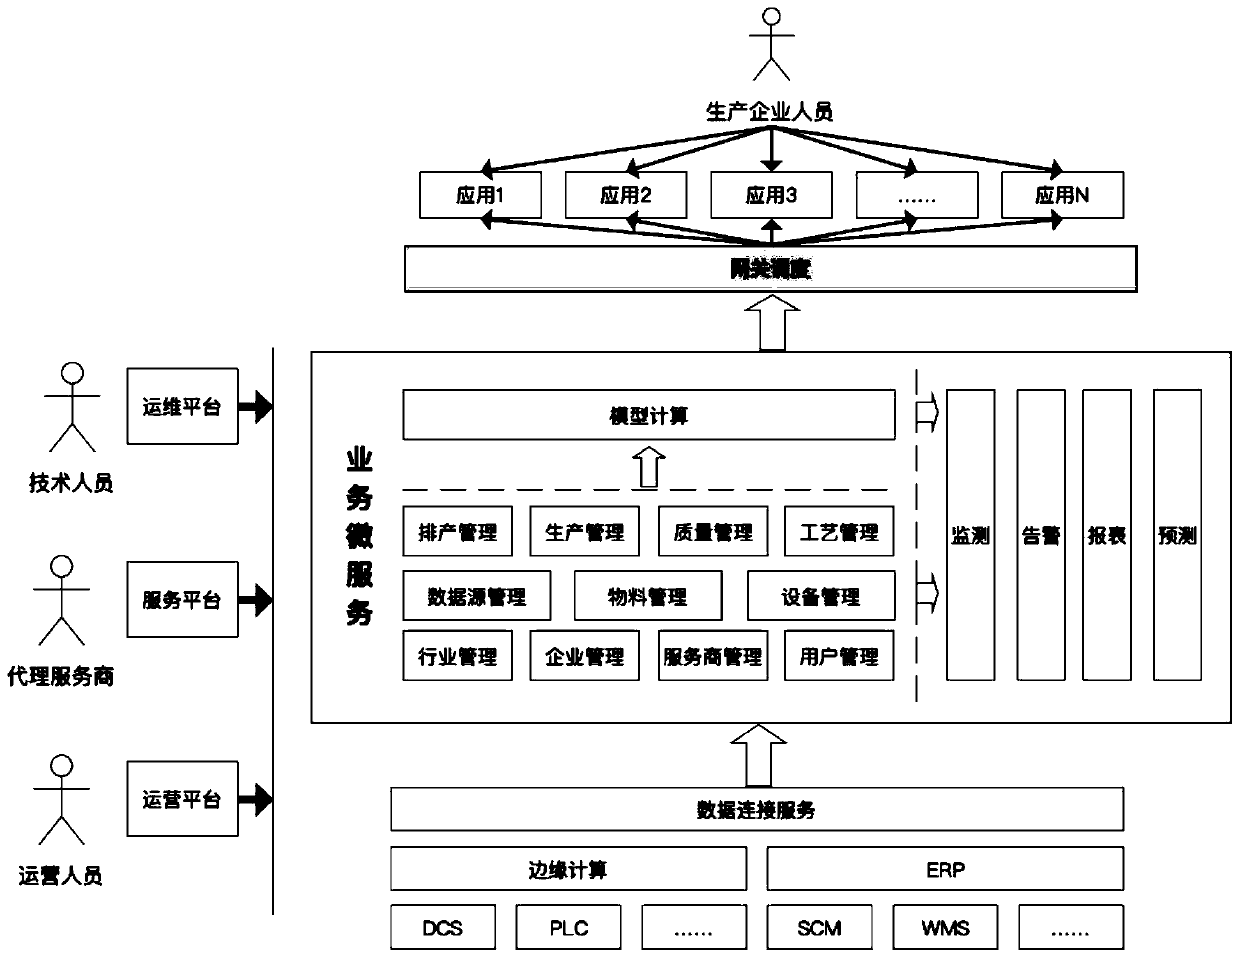 Micro-service architecture of process industry datamation operation platform